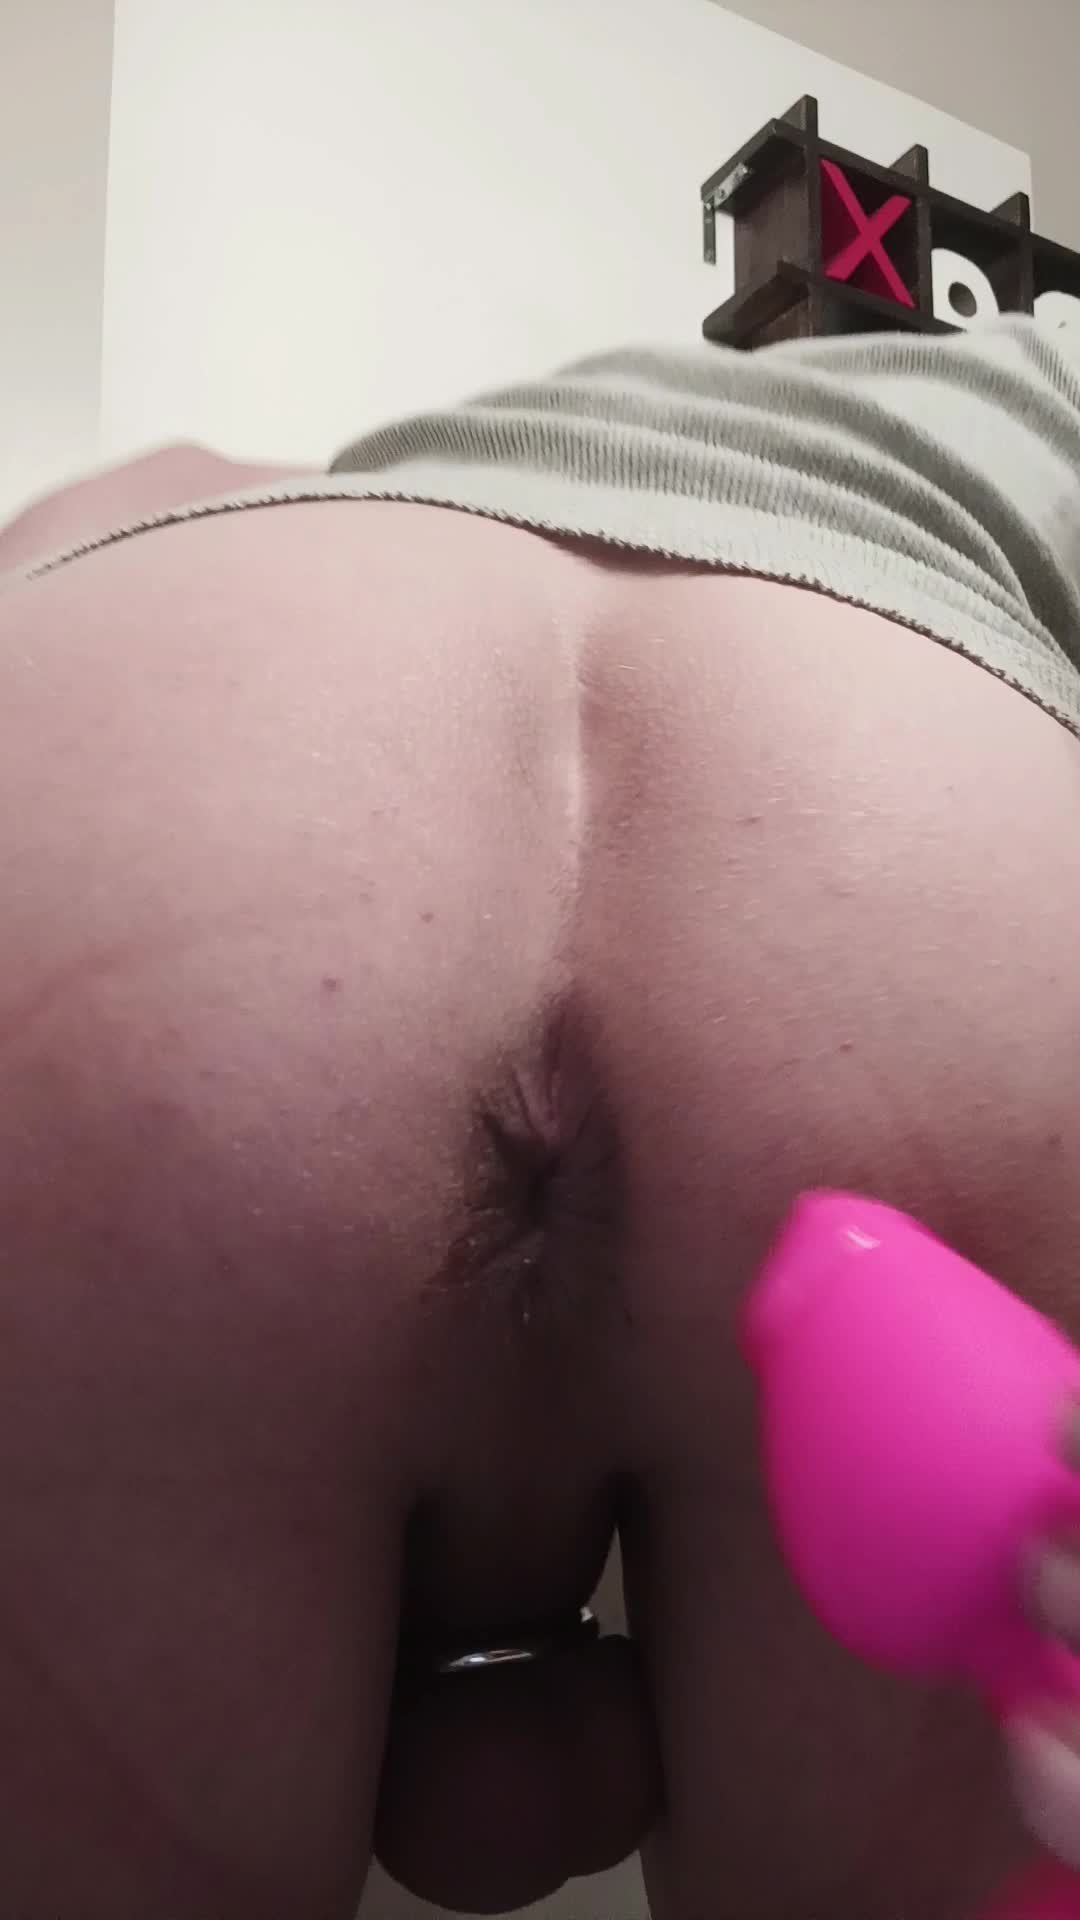 Video post by Chastityhubby